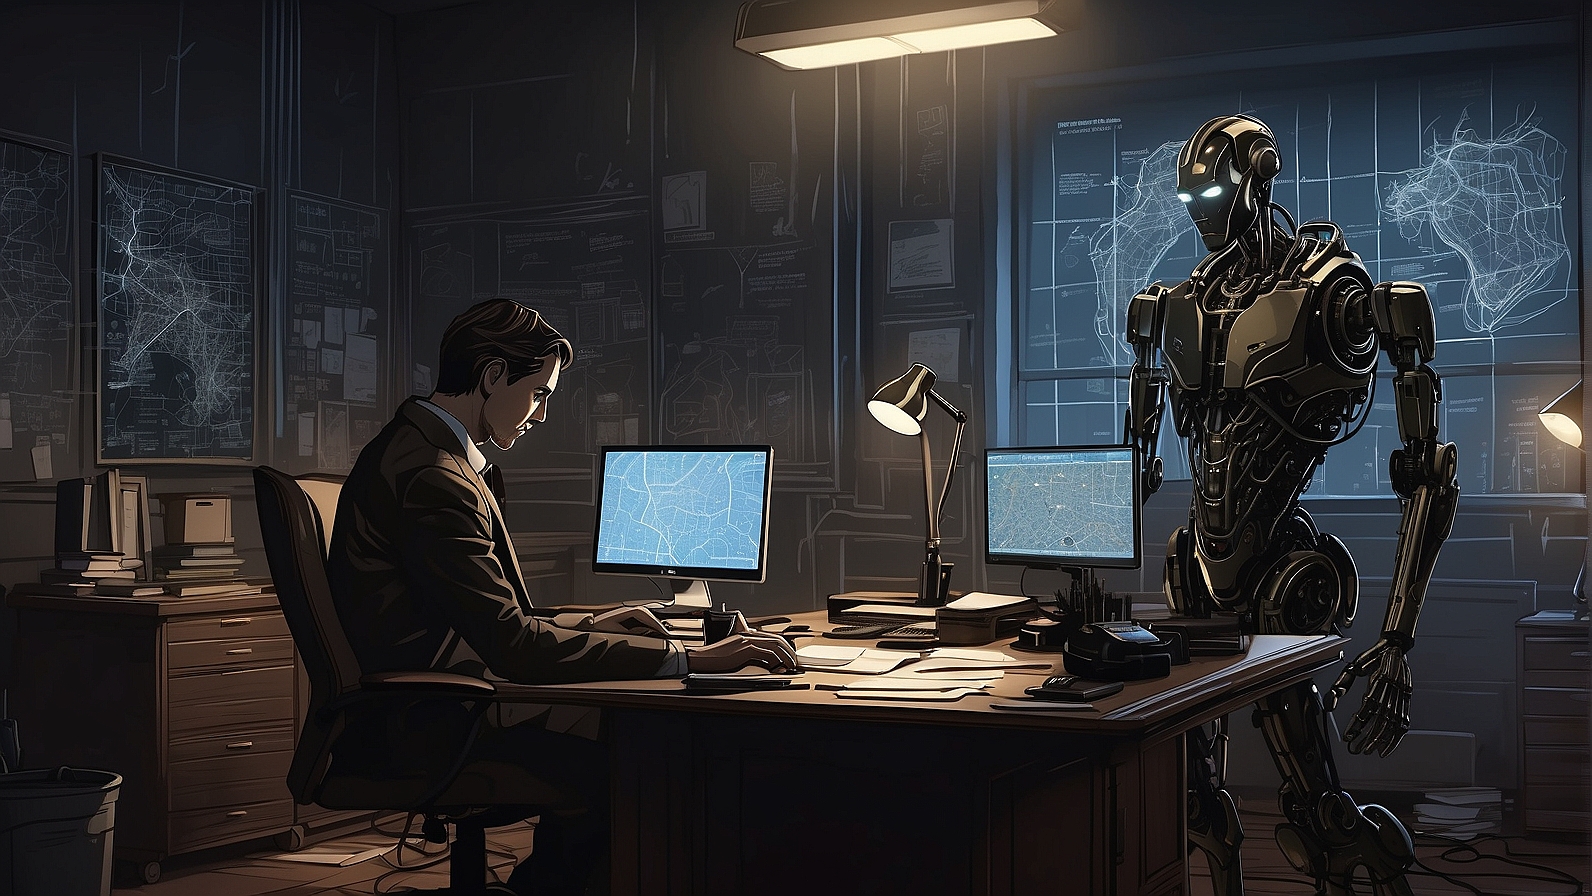 Imagine a dark, noir-themed detective's office with an AI detective (think a blend of Sherlock Holmes and a high-tech robot) analyzing screens displaying code, locks, and digital maps, unraveling the mysteries of prompt injection vulnerabilities in GPTs.